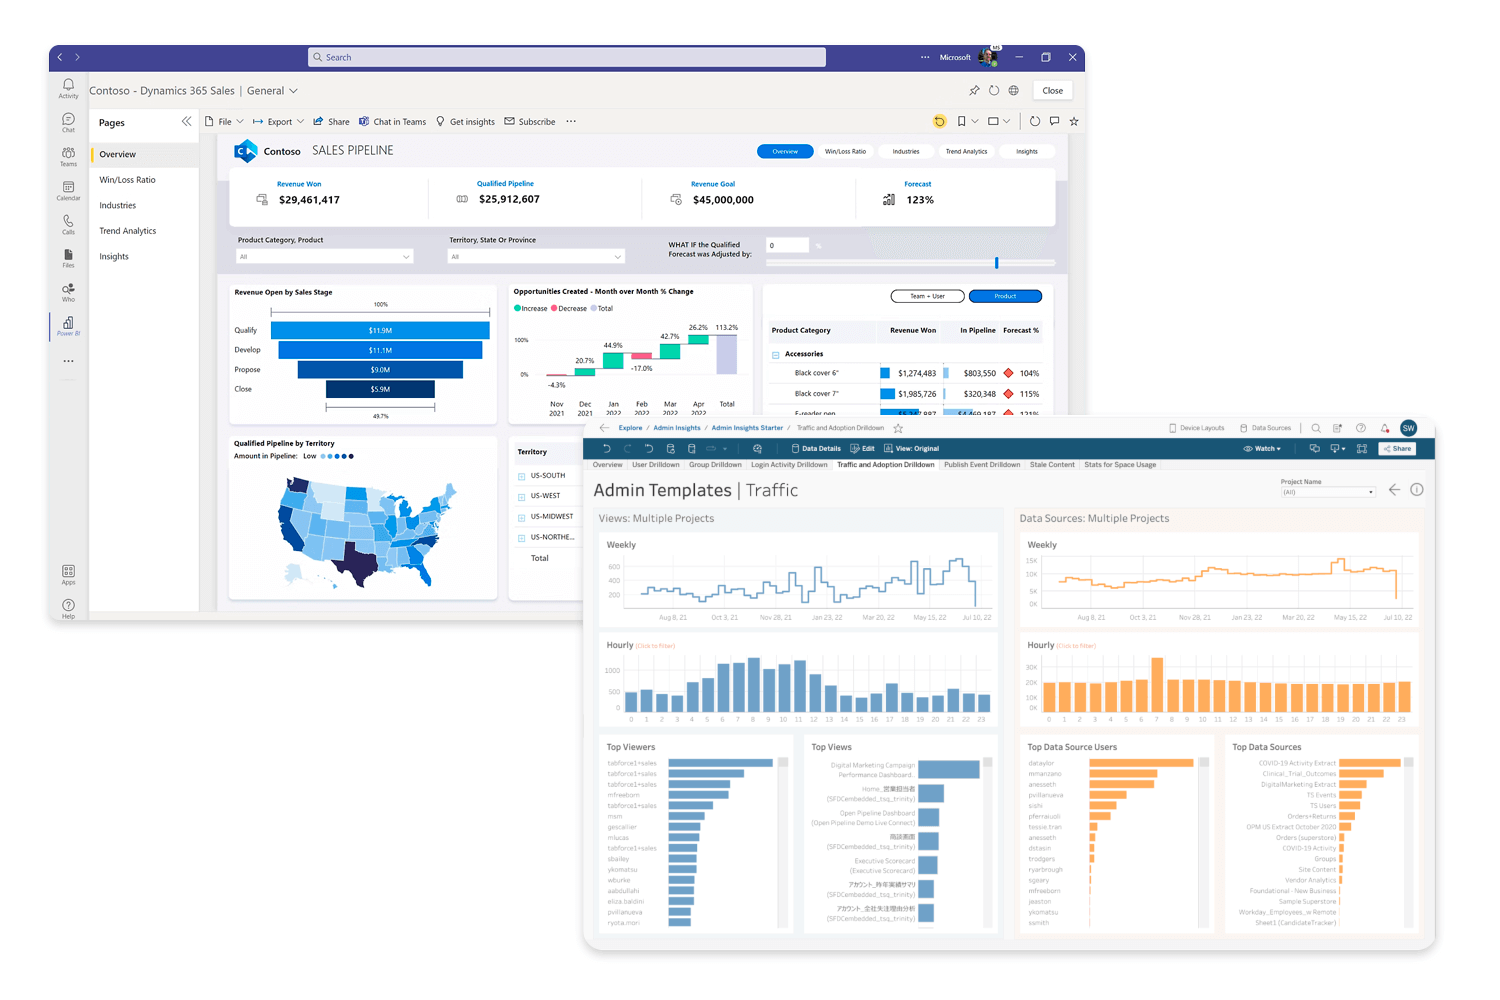 Comprehensive data dashboards displaying various metrics and insights